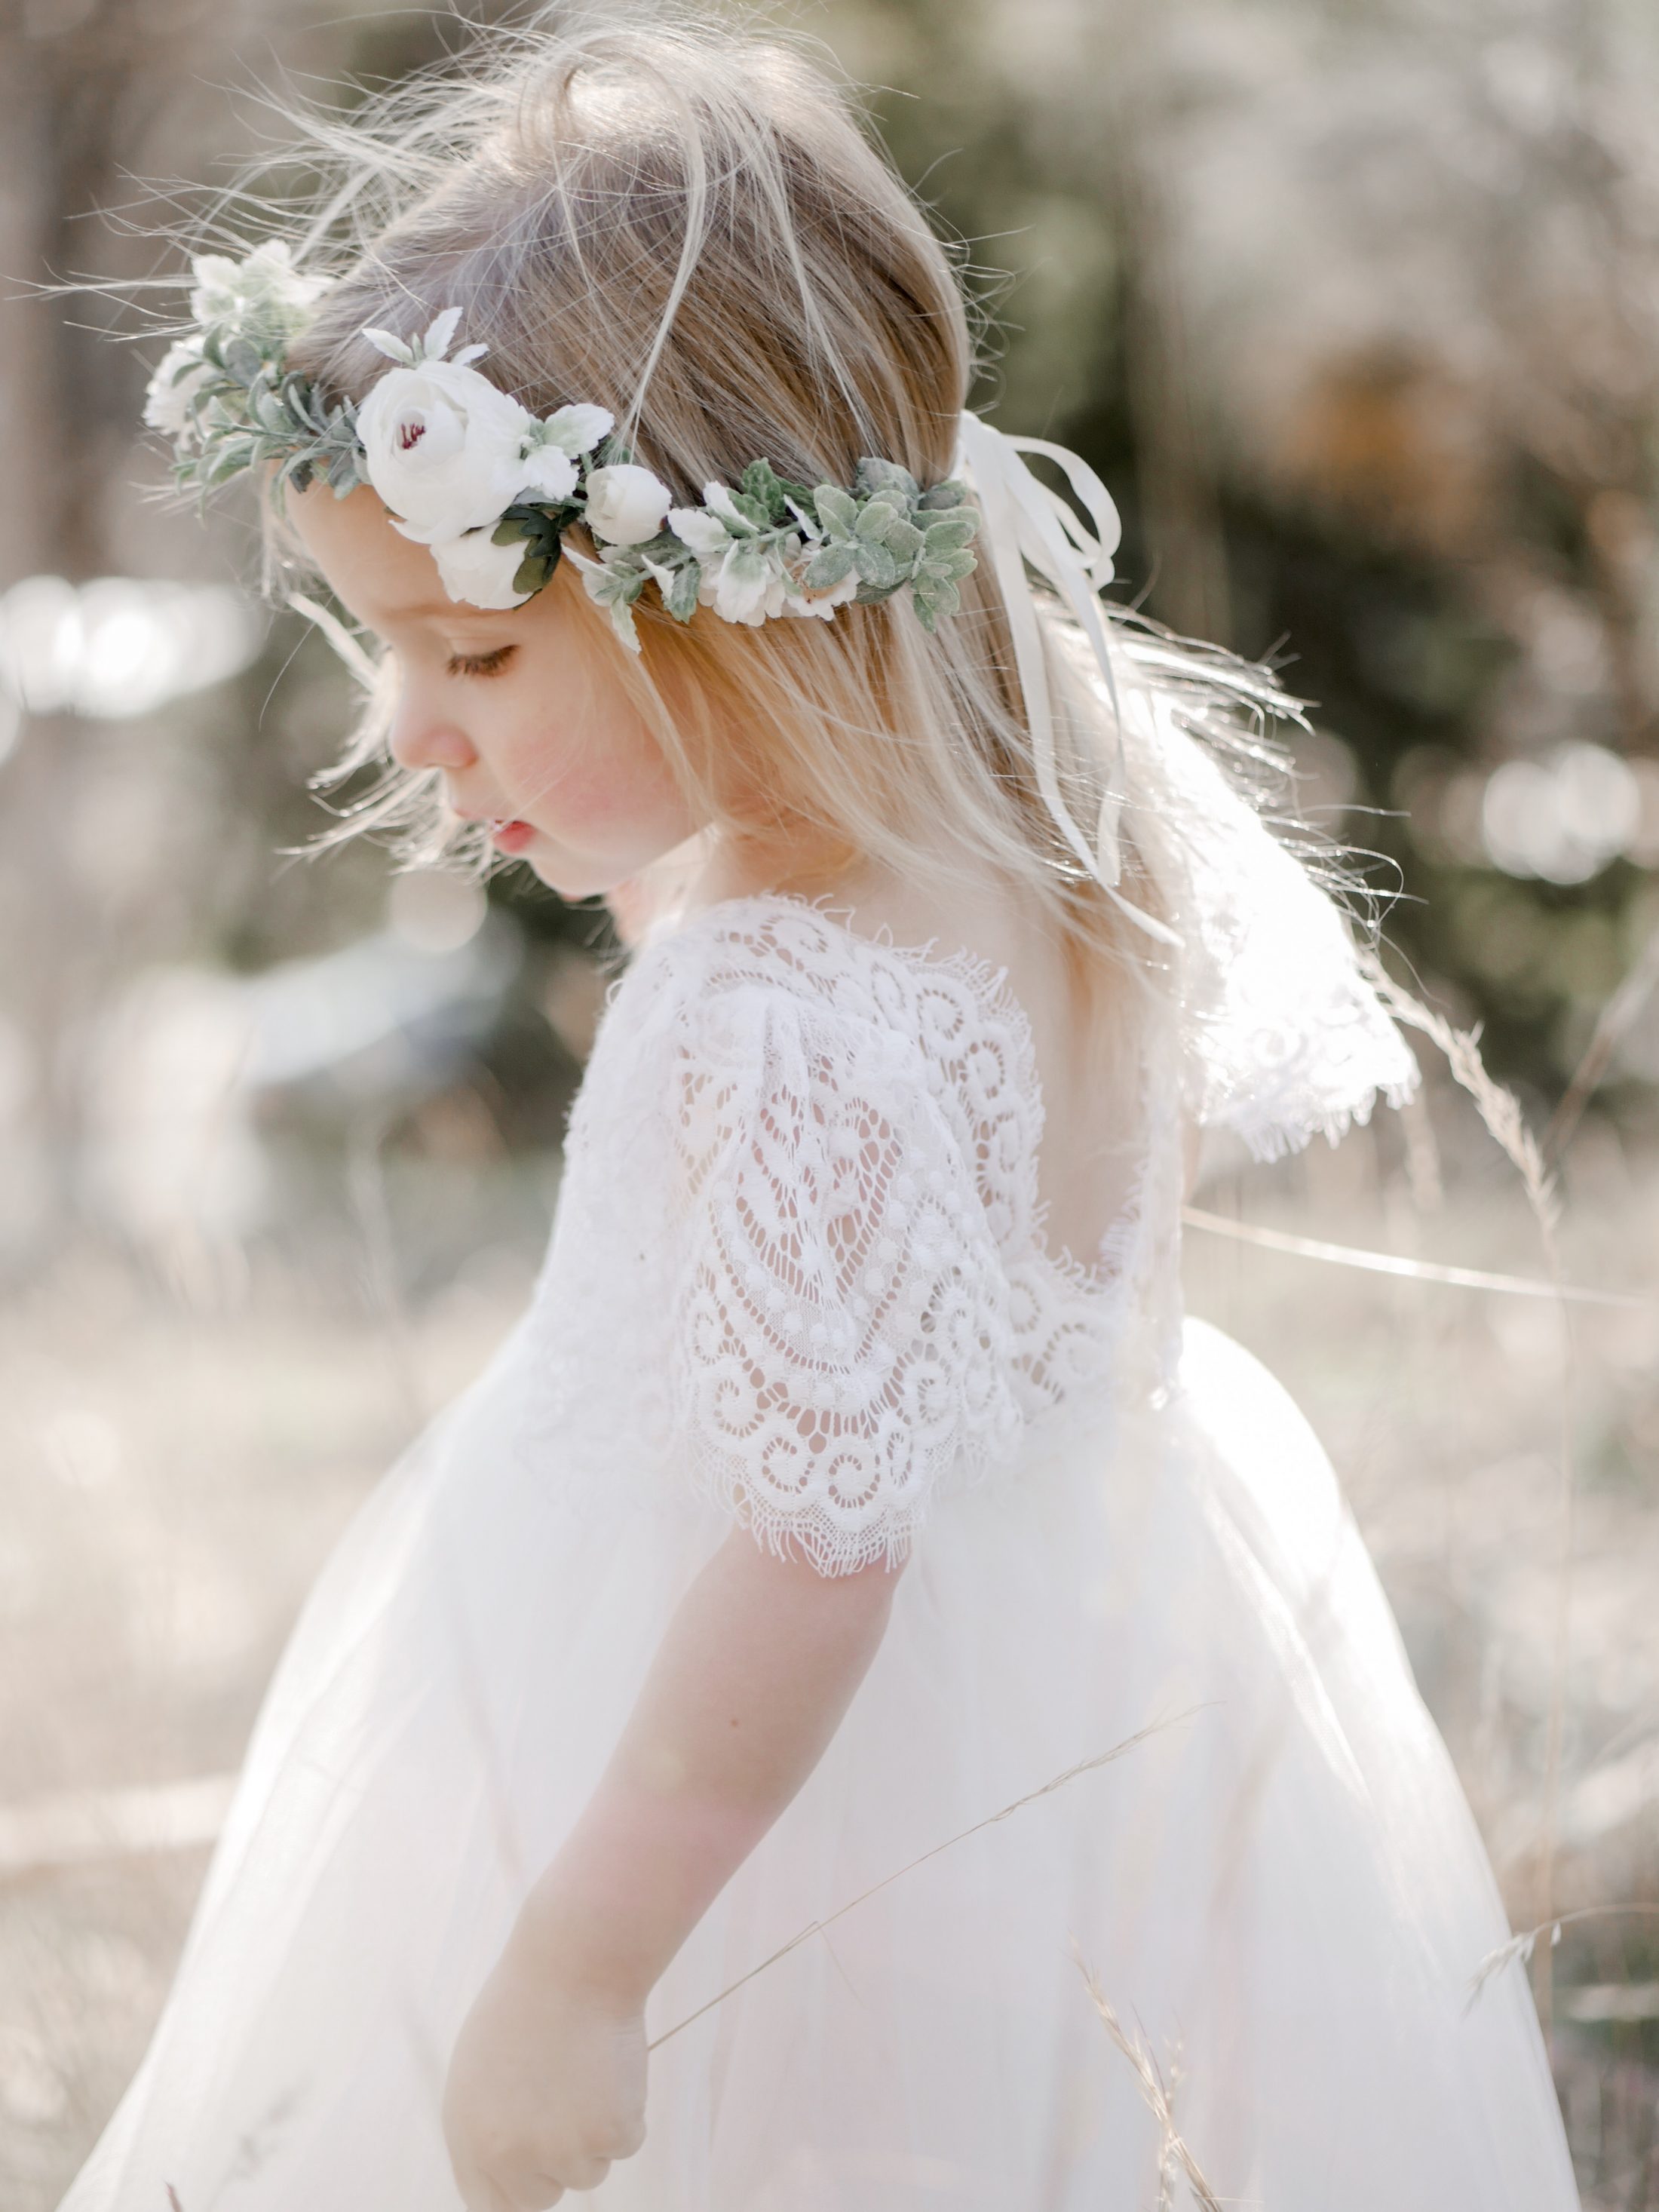 Willow Flower Crown - Coco Blush Boutique - Where little girls dreams ...